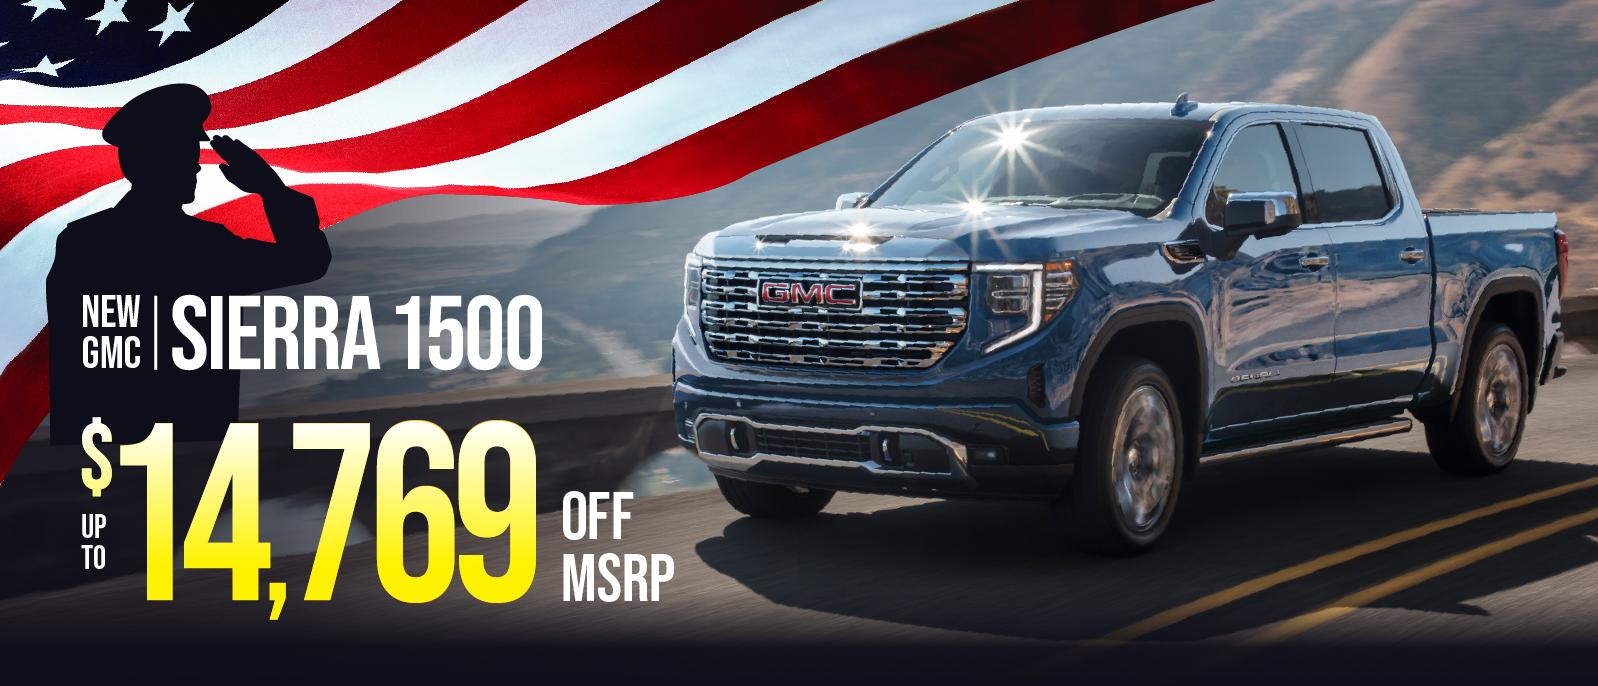 New GMC Sierra 1500 - save up to $14769 off MSRP